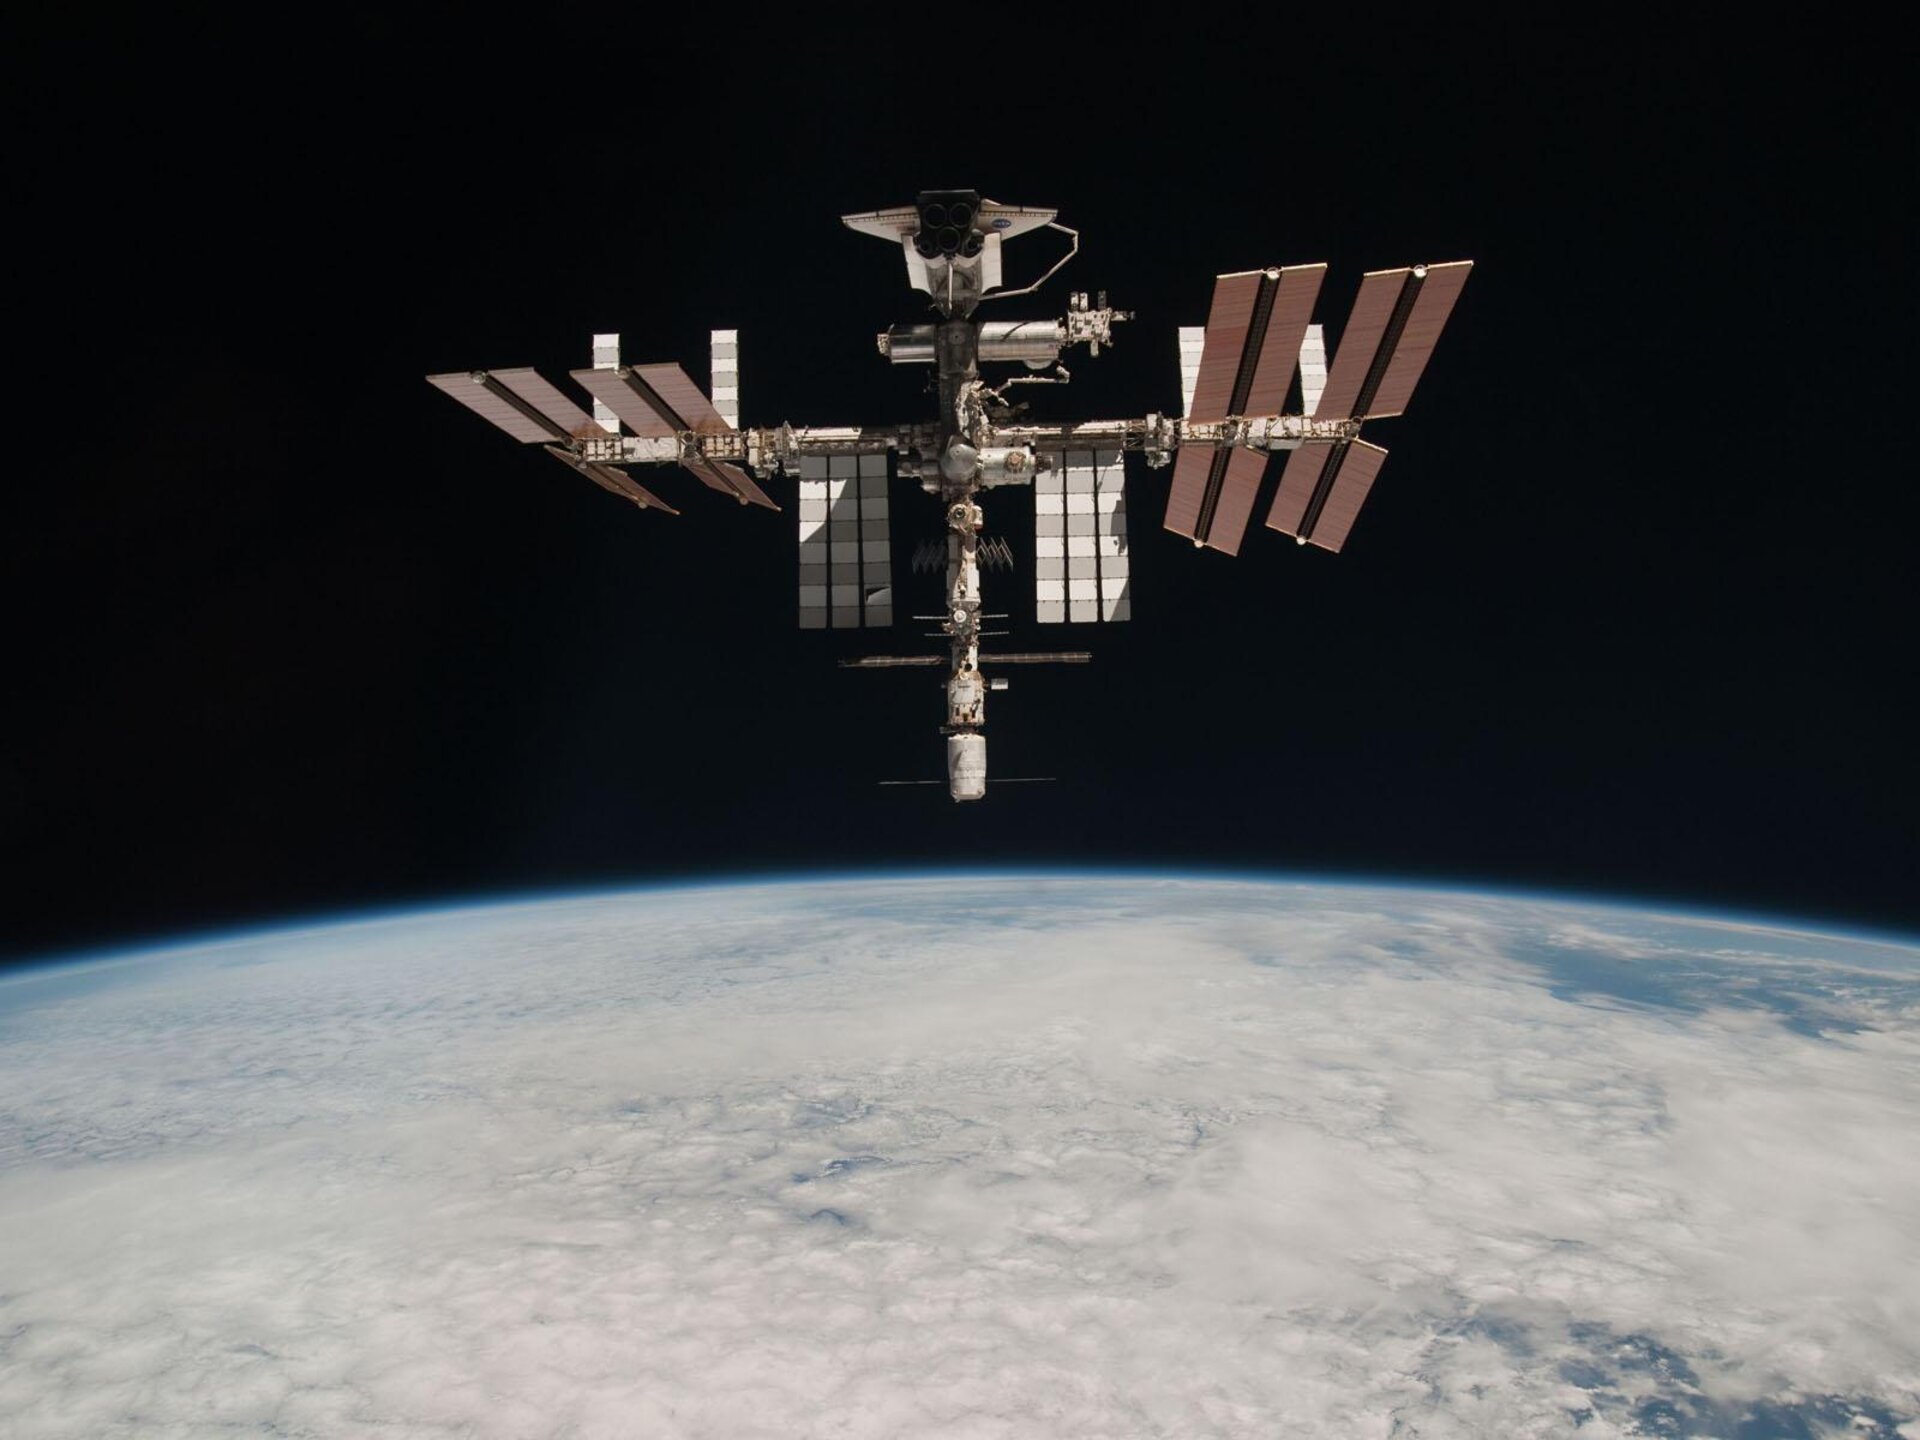 The_International_Space_Station_with_ATV-2_and_Endeavour_pillars